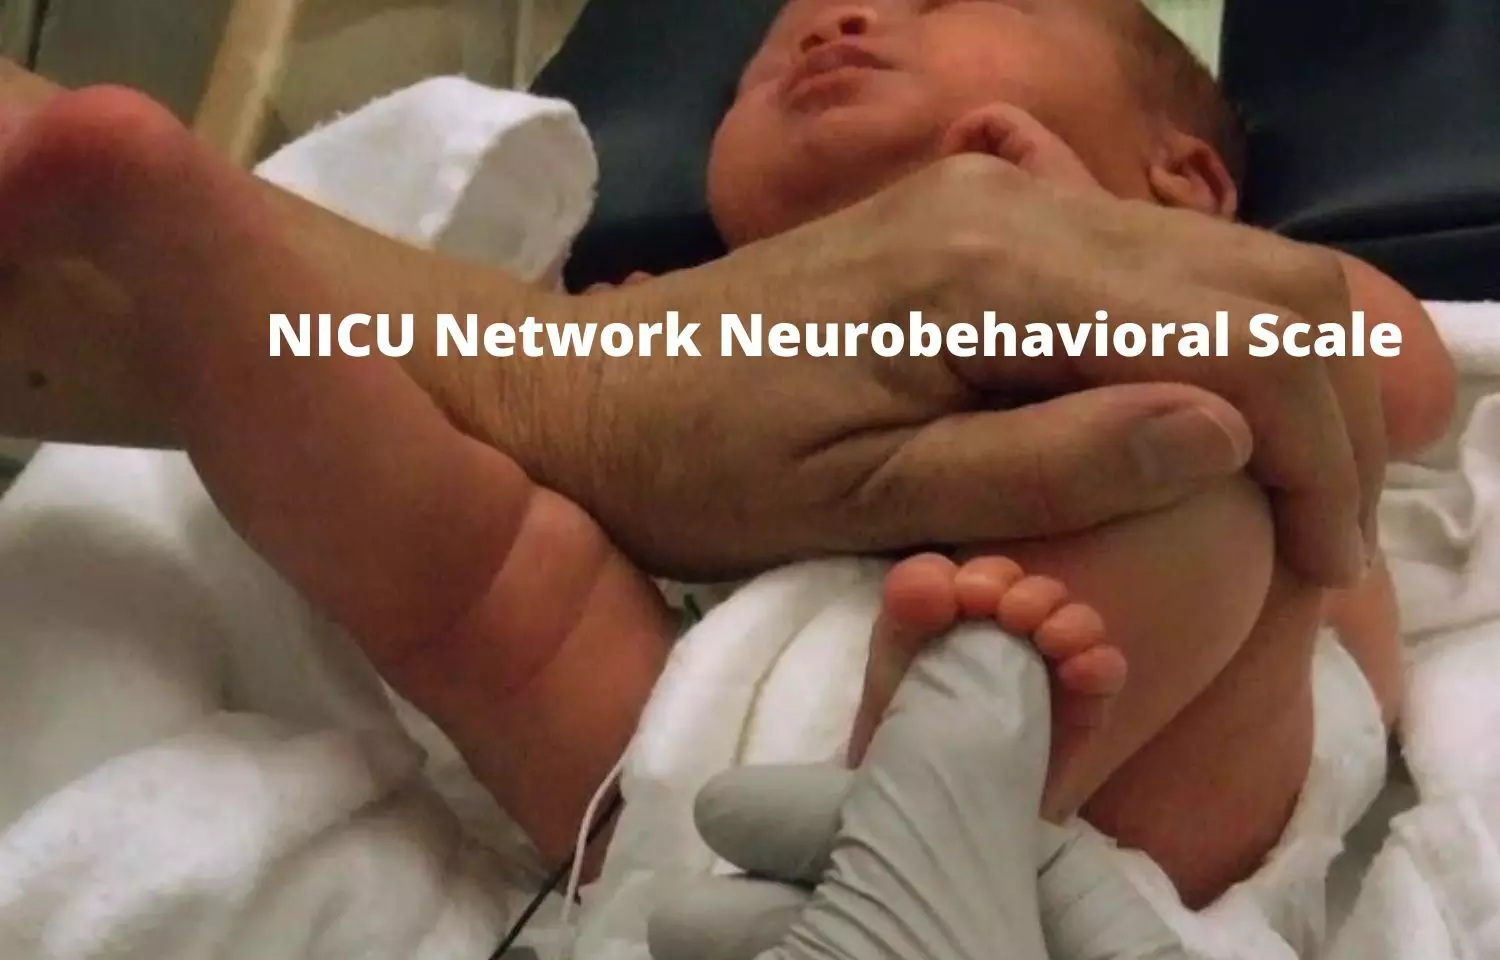 Neonatal neurobehavioral patterns help in predicting cognitive and motor delays in toddlers: JAMA